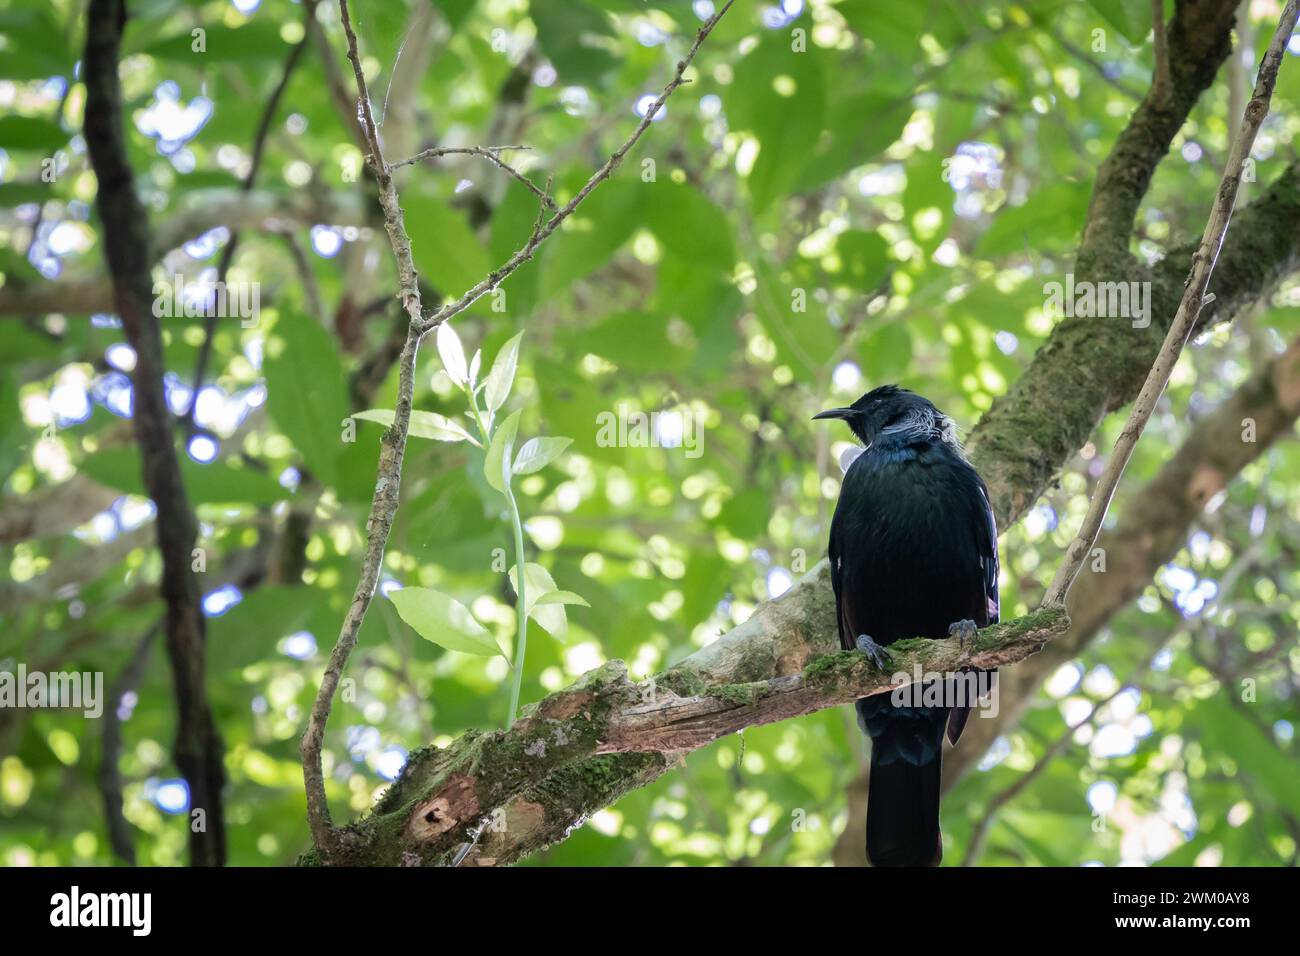 Rare native Tui bird sitting on the branch in green forest, New Zealand Stock Photo